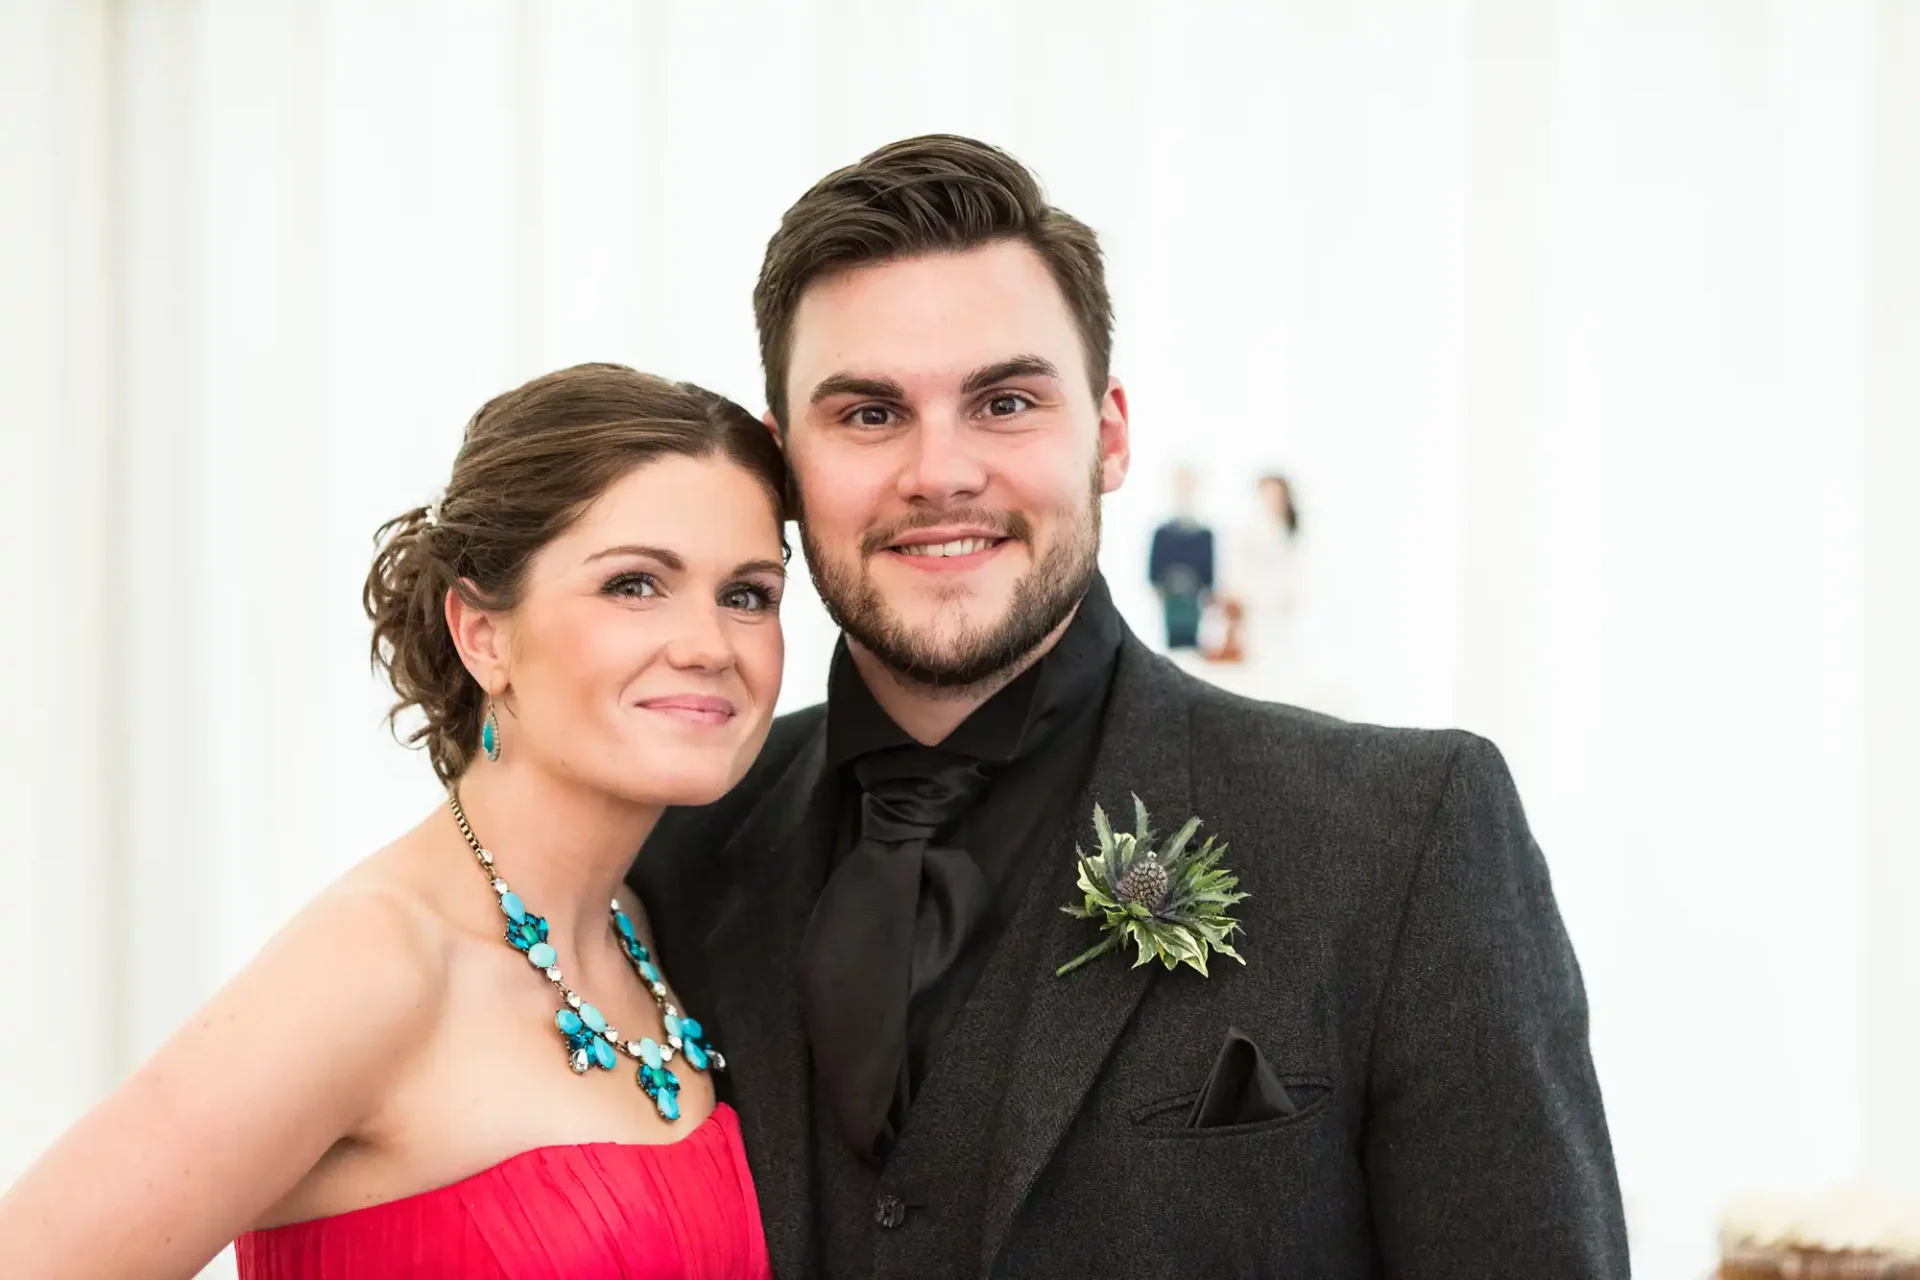 A couple dressed in formal attire smiling at a wedding, with the woman in a red dress and blue necklace, and the man in a gray suit with a black bow tie.